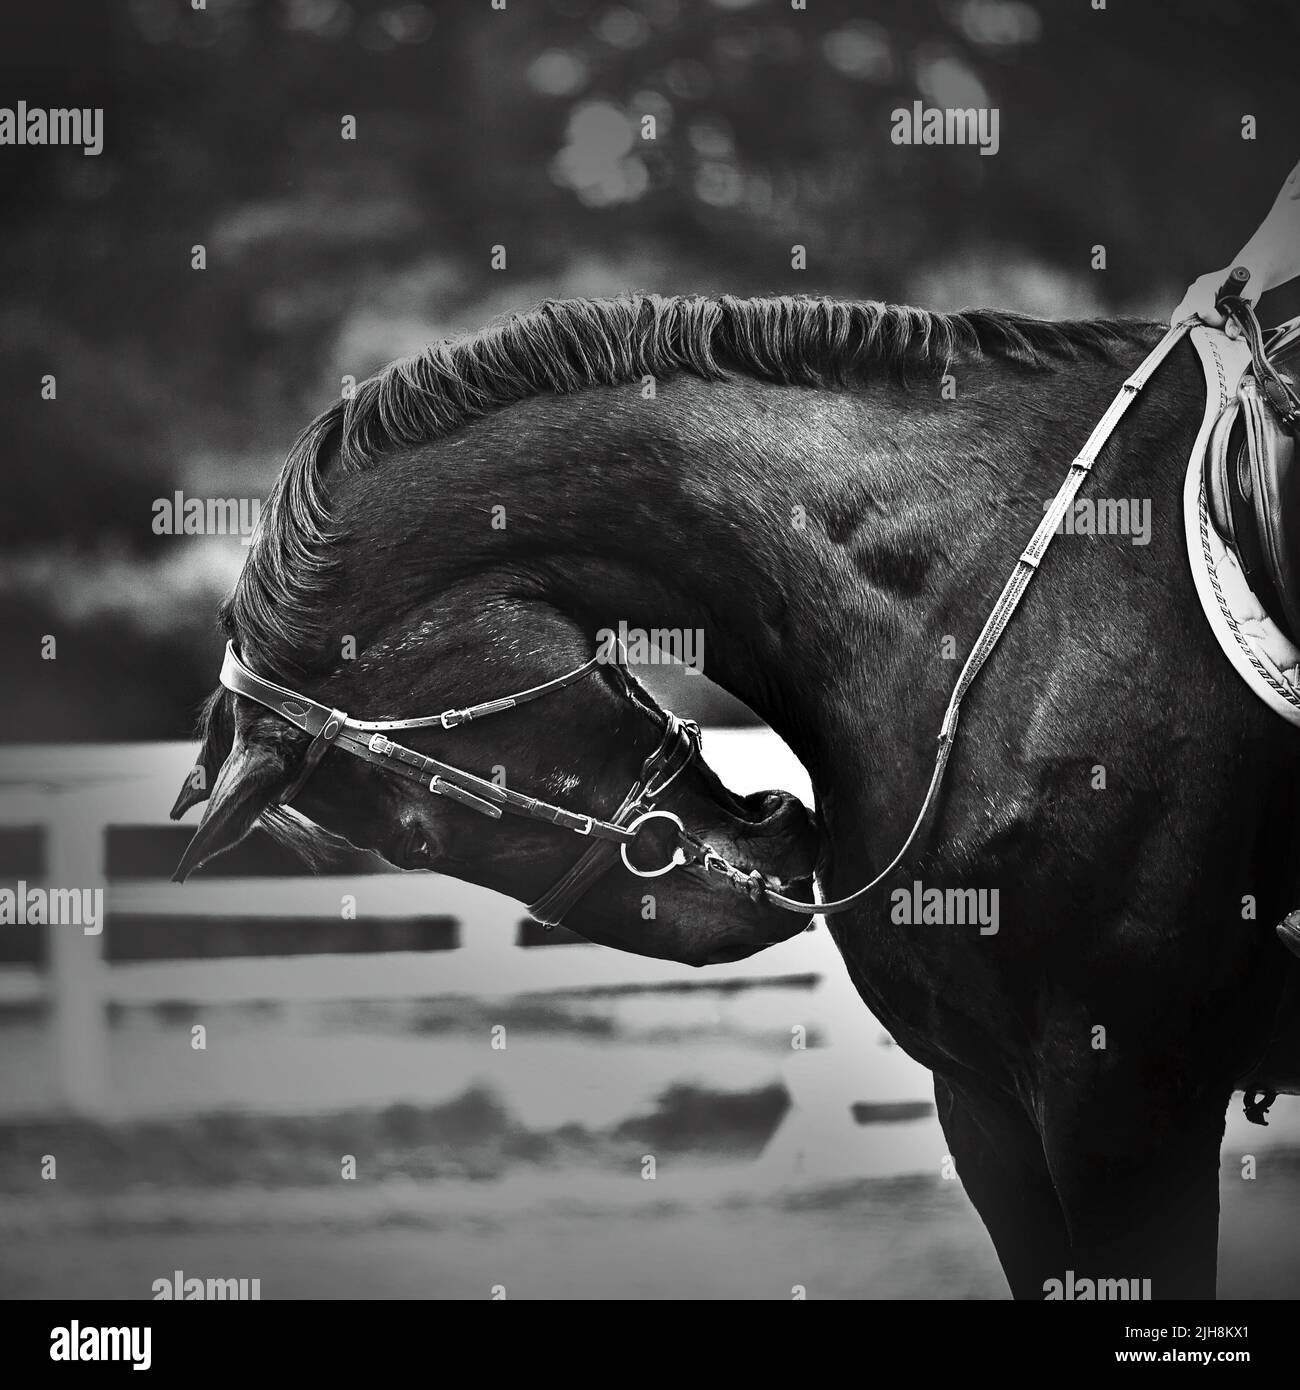 A black and white portrait of a black horse with a rider in the saddle, which bent its neck. Horse riding. Equestrian life. Stock Photo